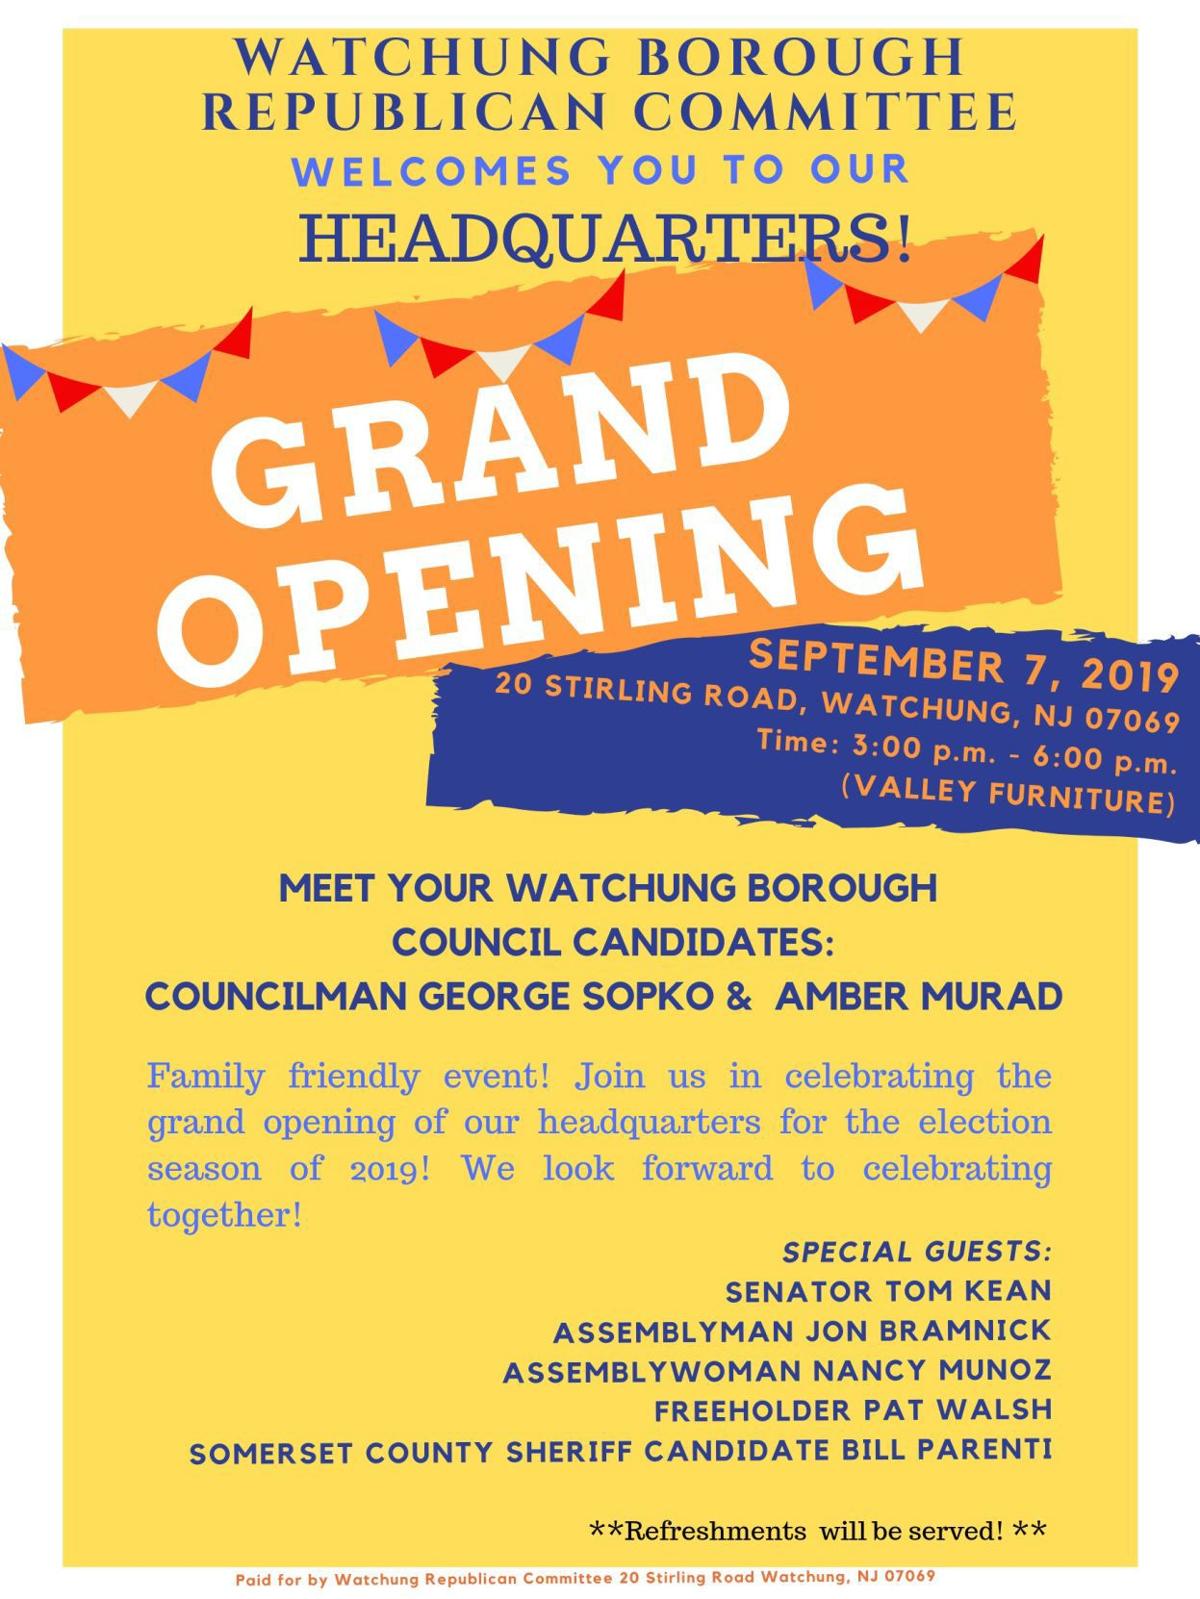 Watchung Republicans To Open Campaign Headquarters With Sept 7